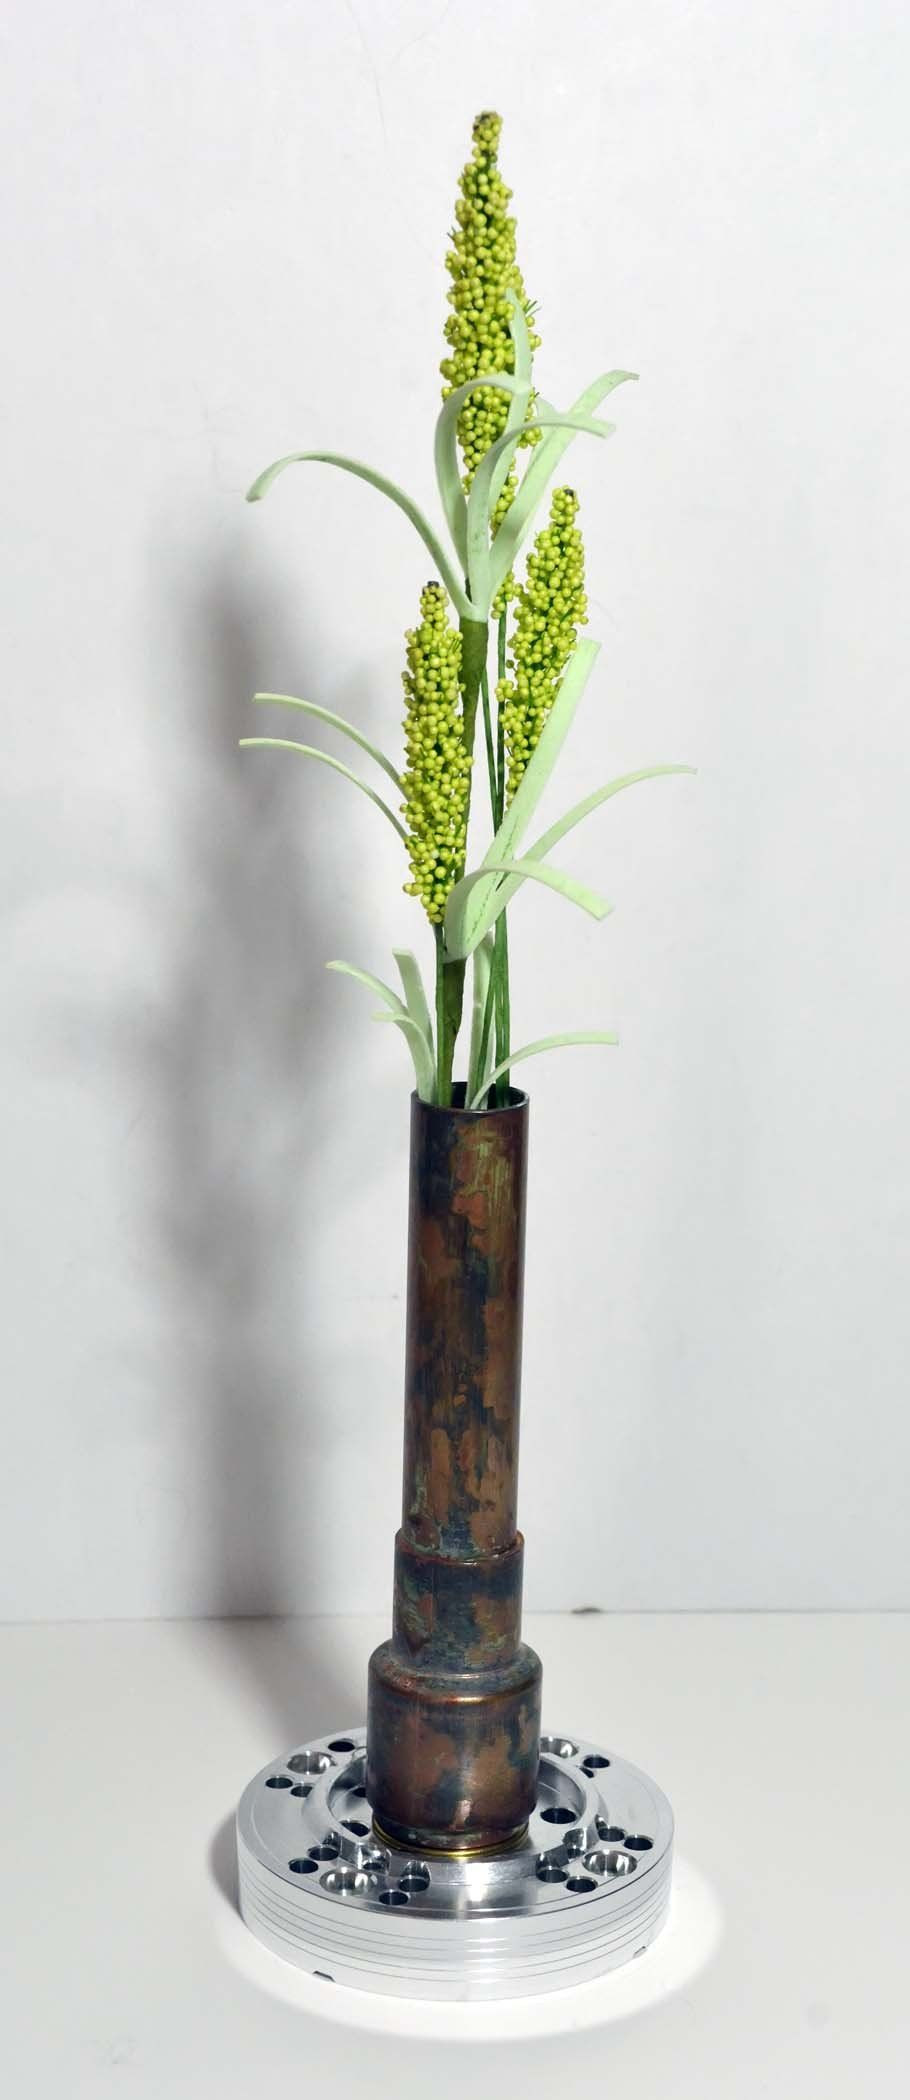 15 Famous High Vases Centerpieces 2024 free download high vases centerpieces of steampunk style decorative dried bud vase made from recycled pertaining to steampunk style decorative dried bud vase made from recycled materials vintage chemistry